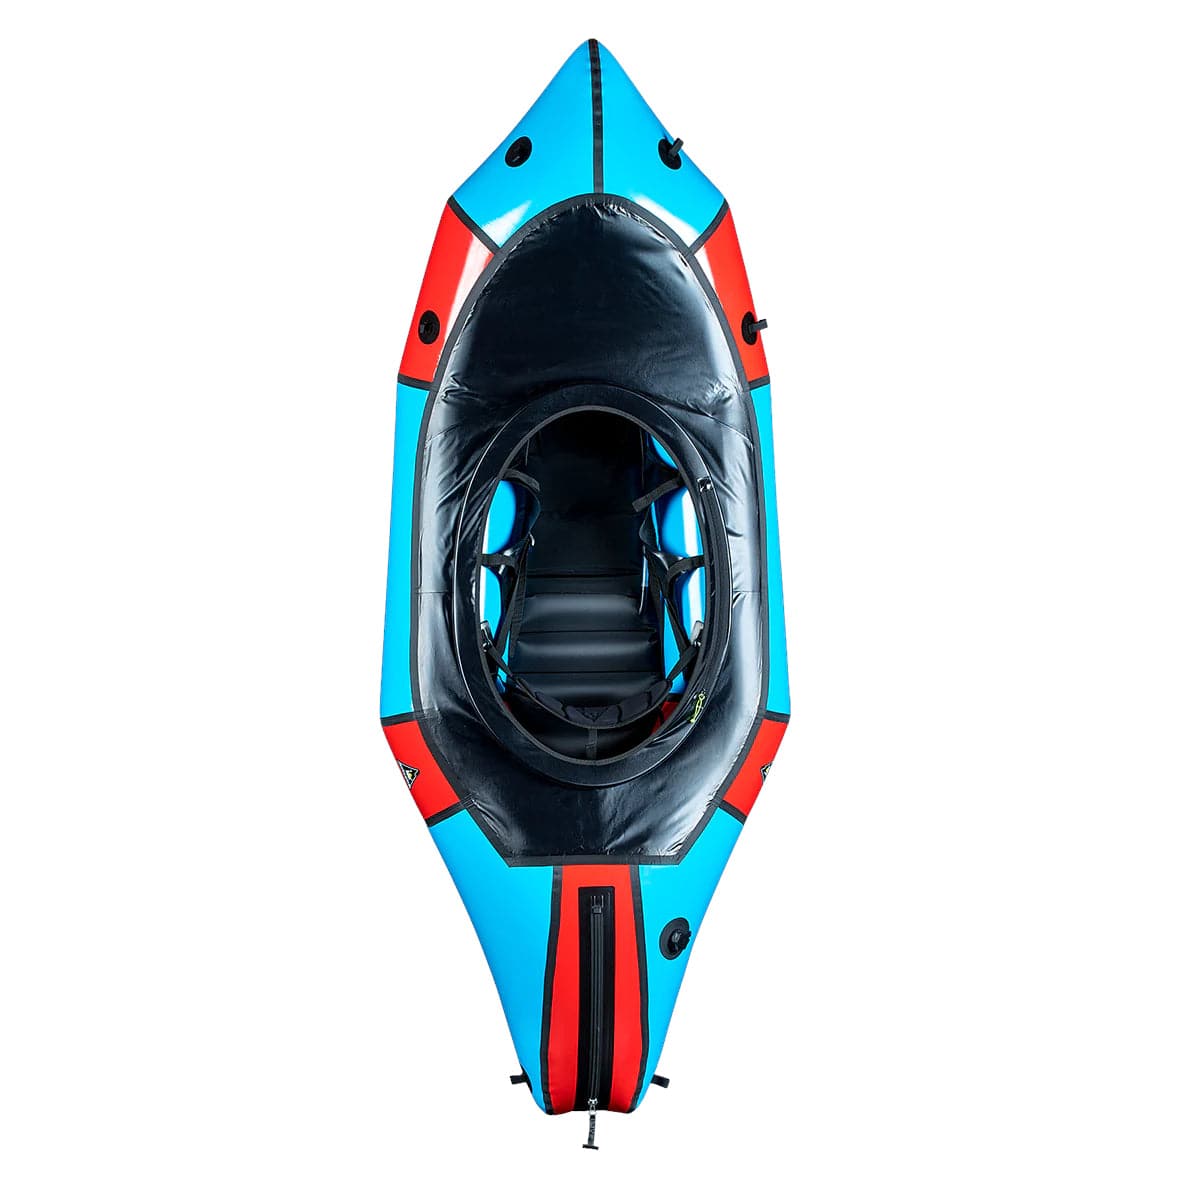 Featuring the Gnarwhal with Whitewater Deck pack raft manufactured by Alpacka shown here from a third angle.